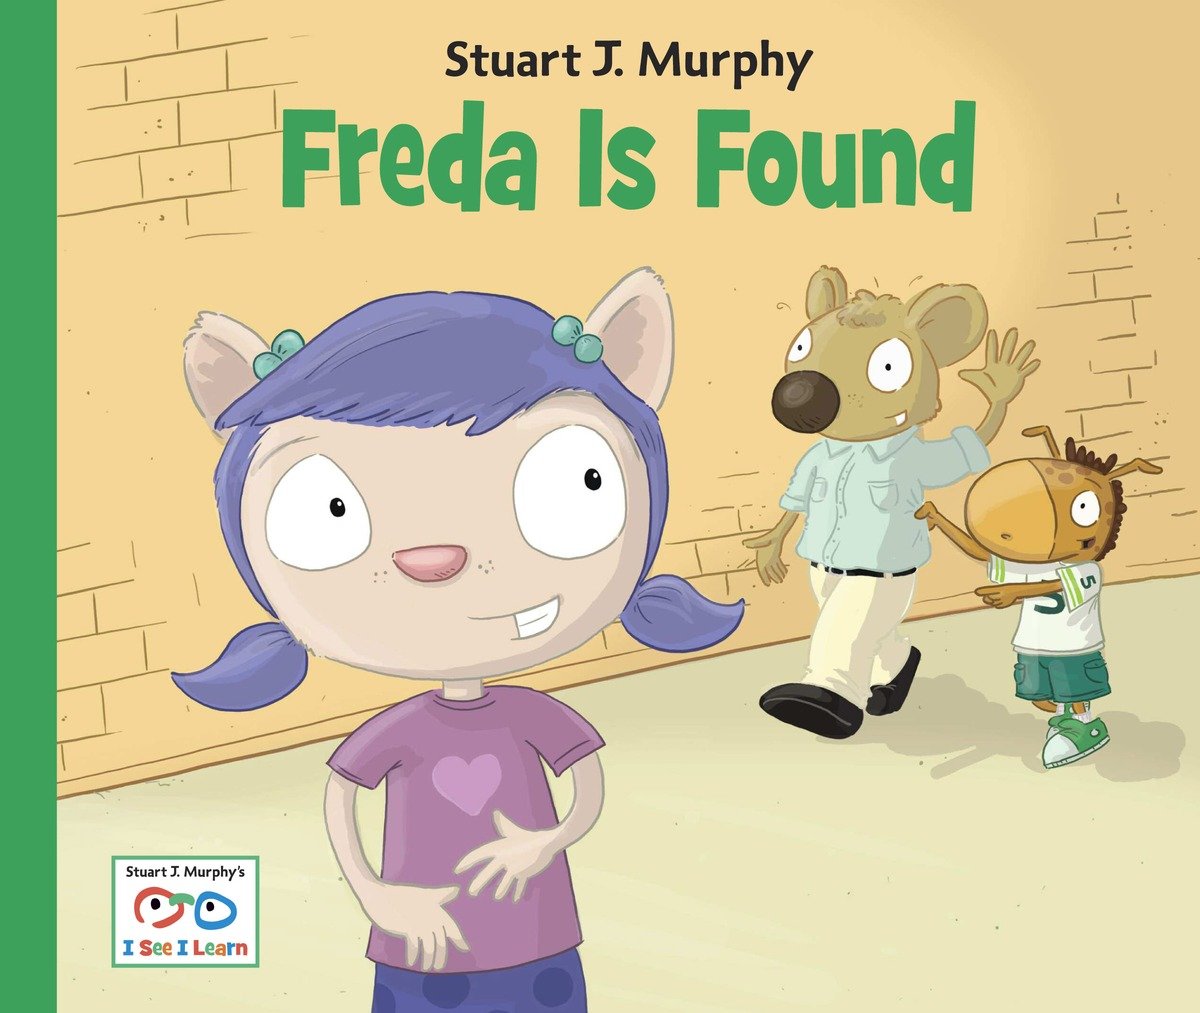 Freda Is Found (Hardcover Book)